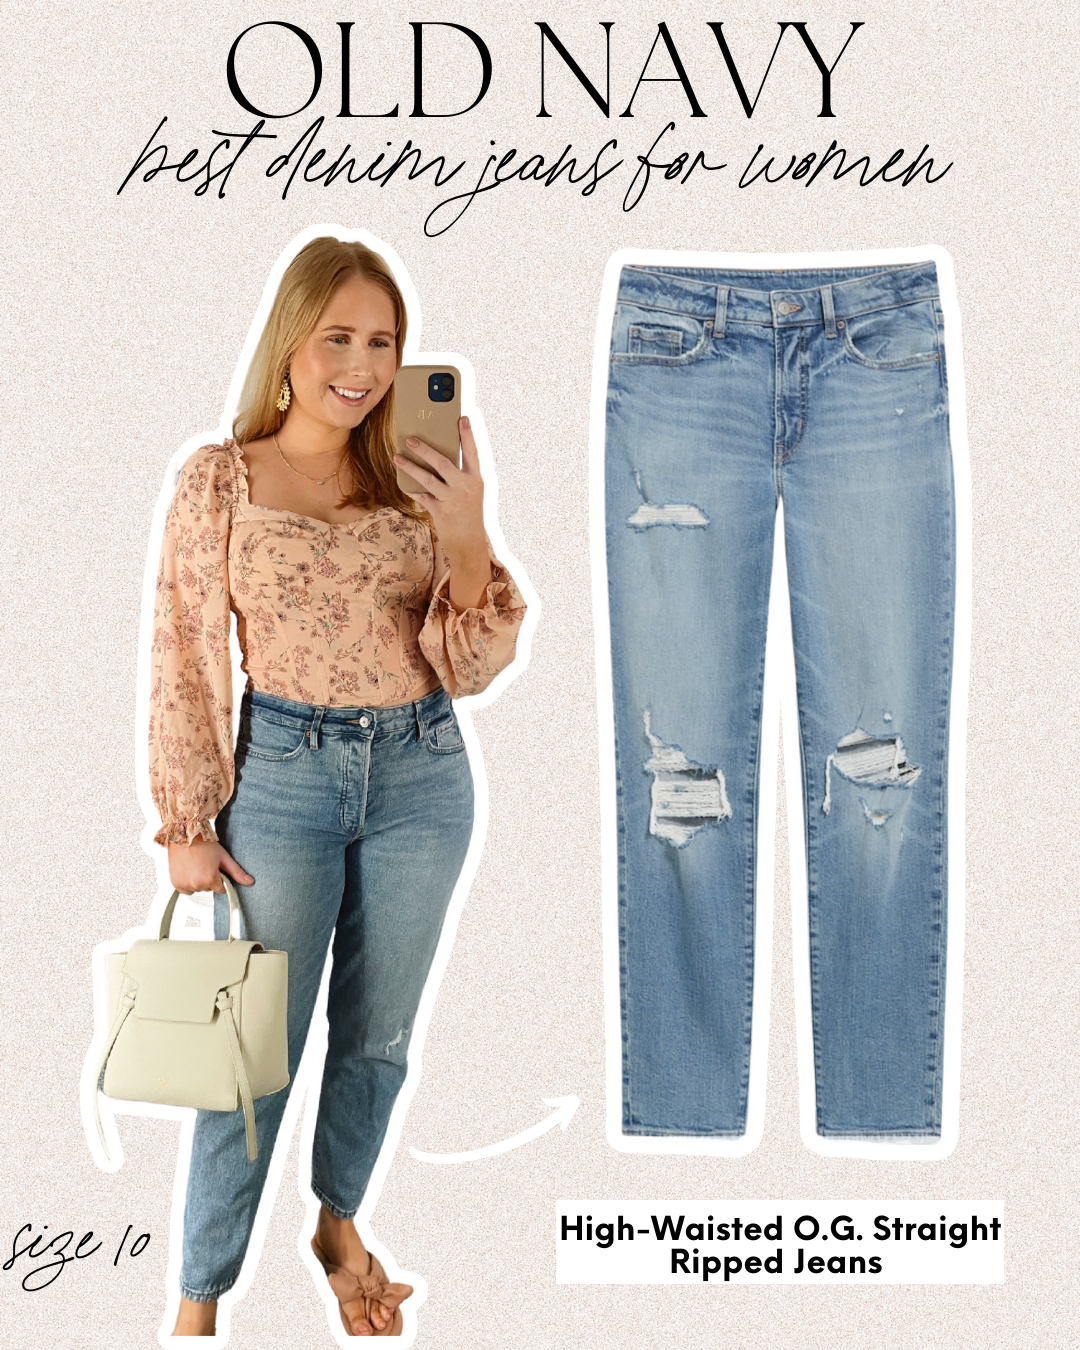 Best High Waisted Jeans from Old Navy - Affordable by Amanda